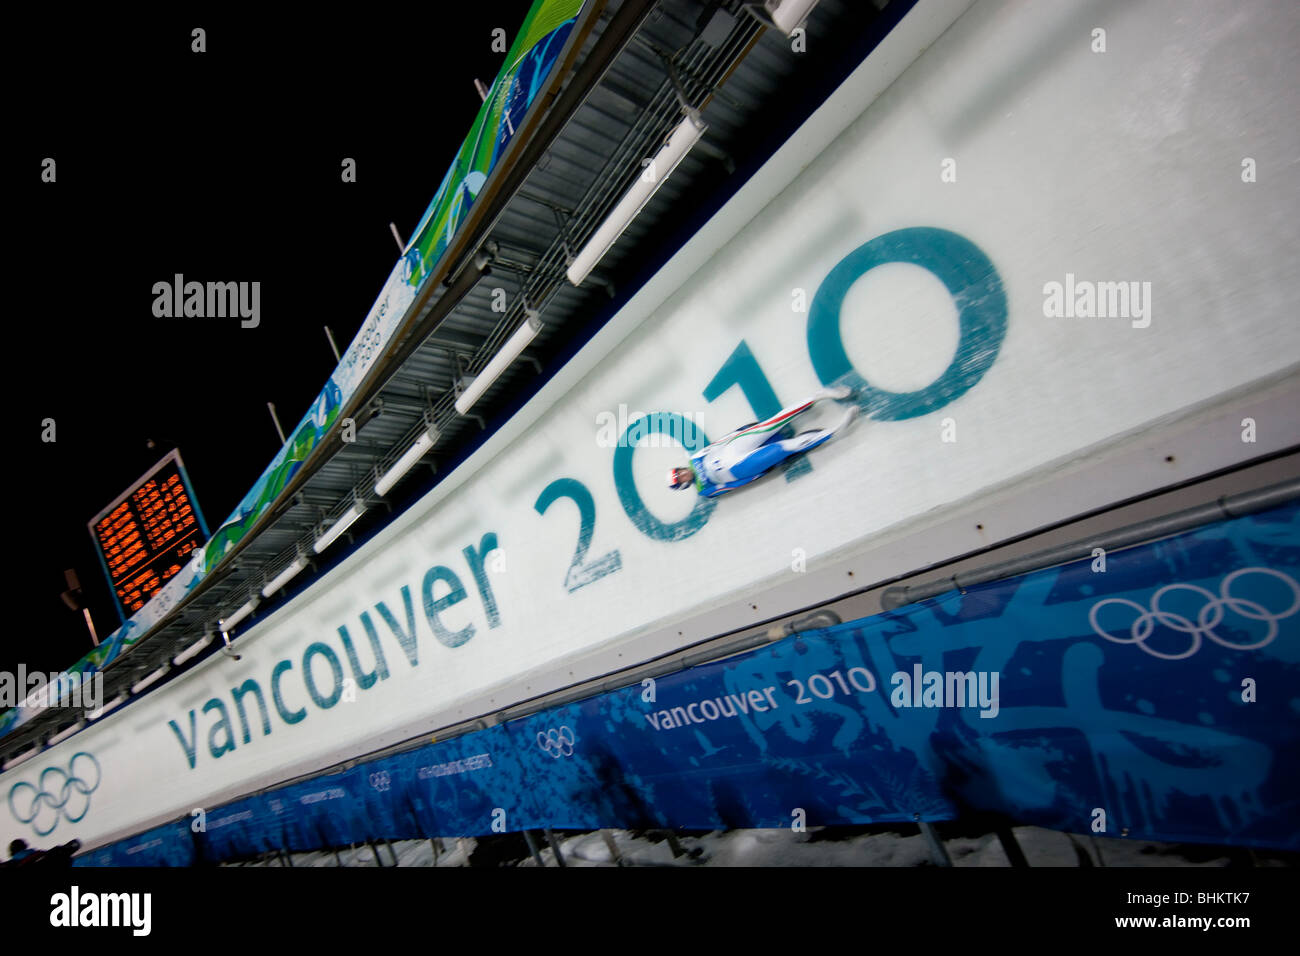 Women's luge event at the Whistler Sliding Center at the 2010 Vancouver Olympic Winter Games. Stock Photo